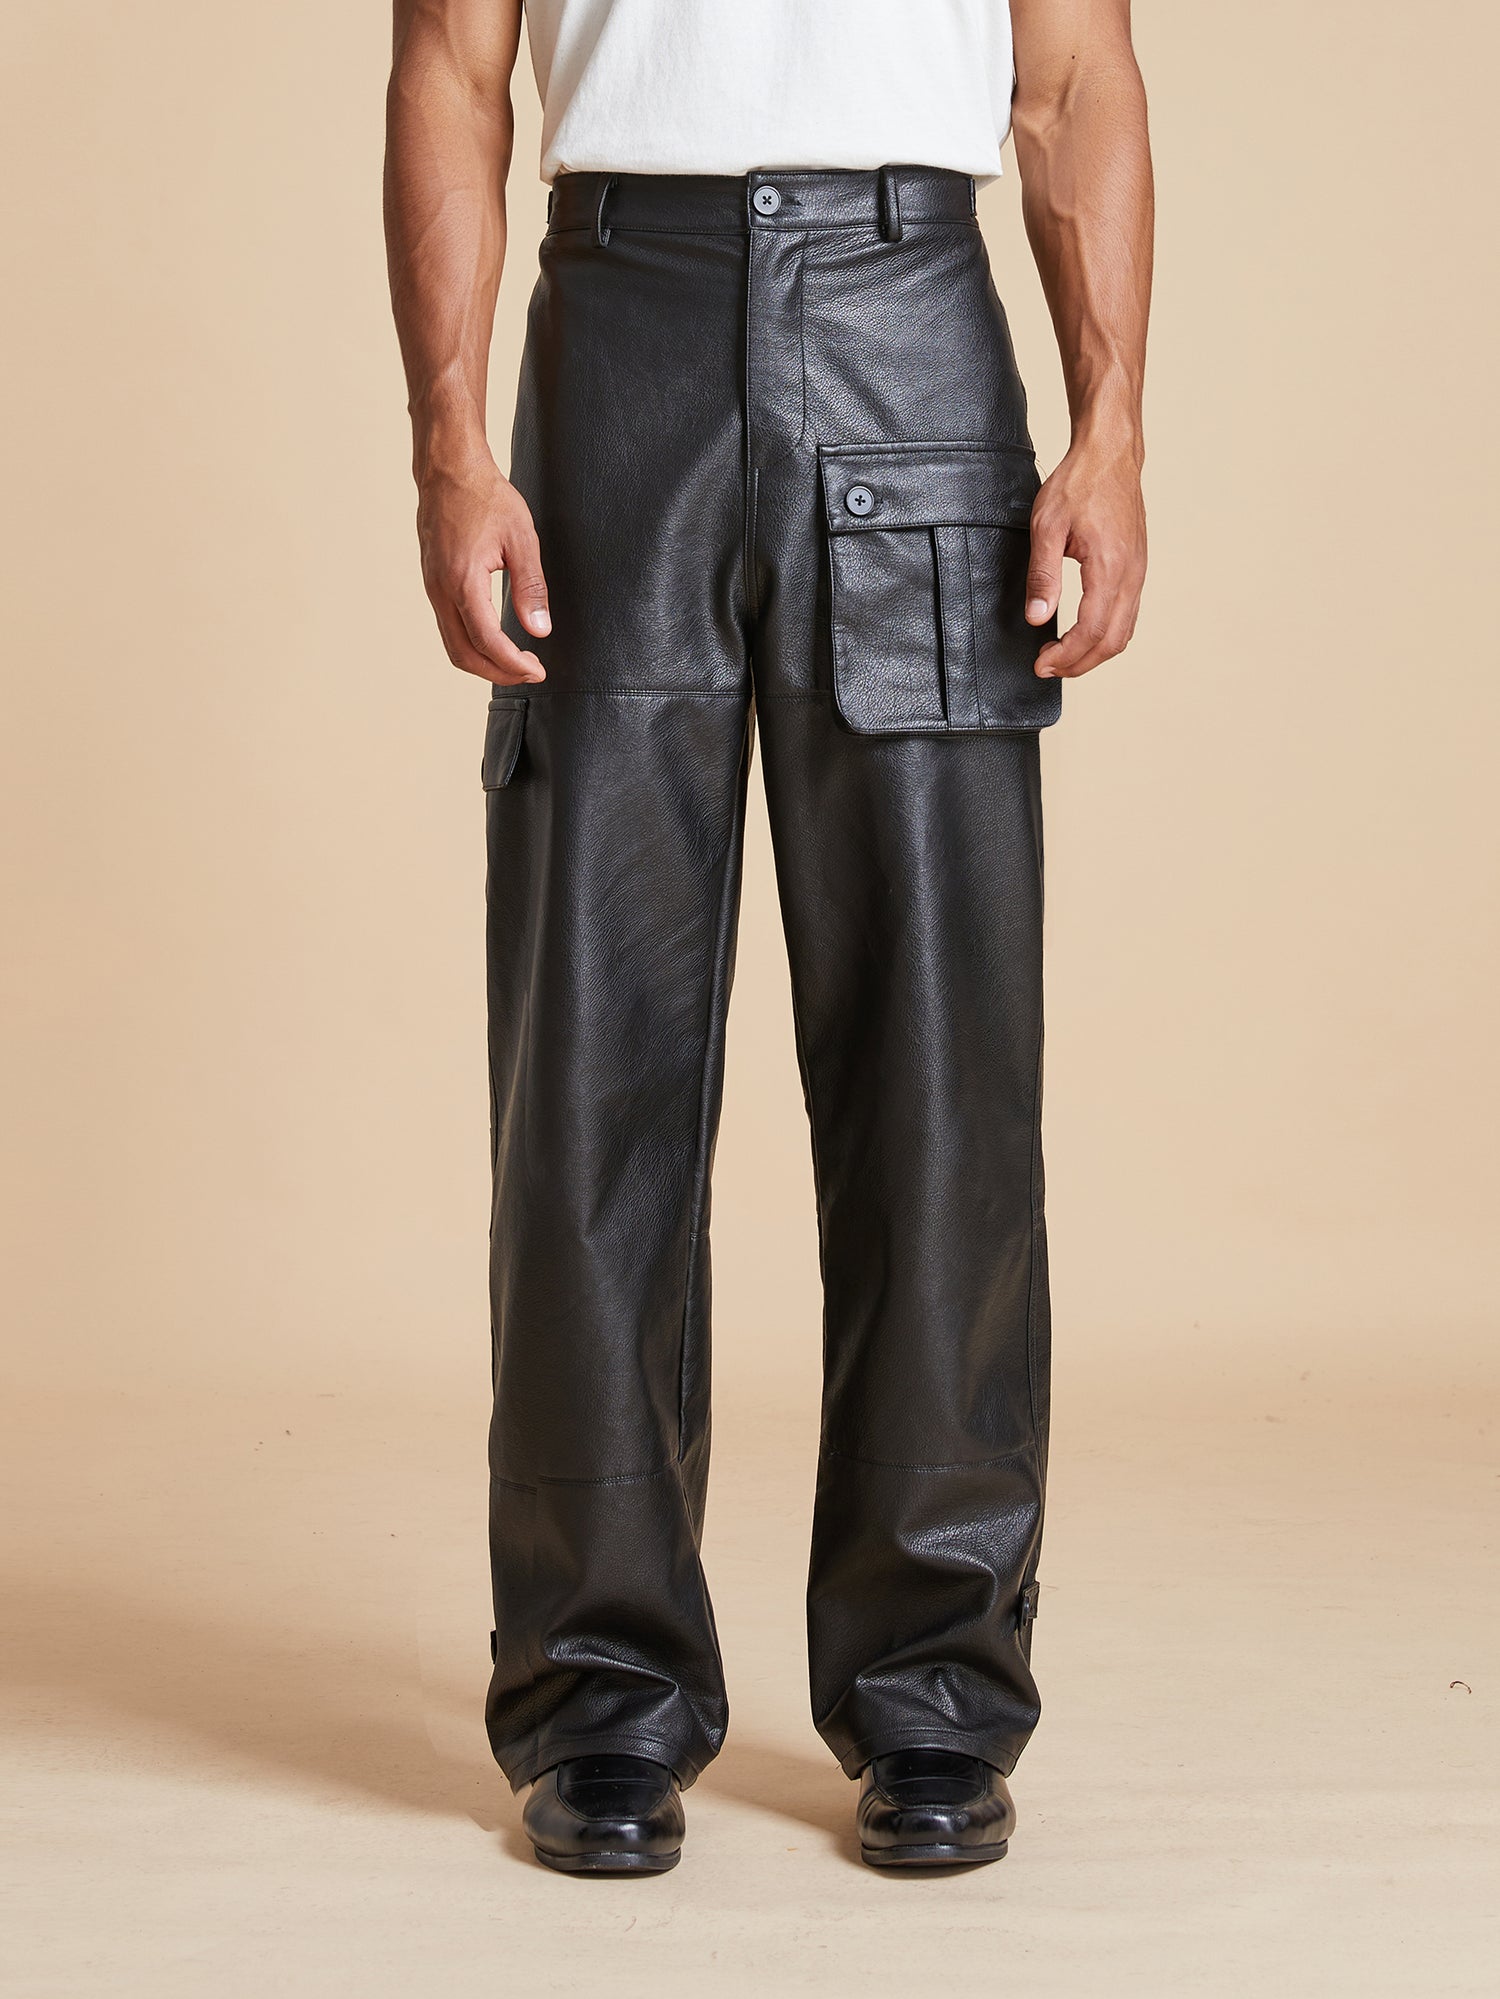 A man wearing Found faux leather cargo pants with cargo pocket placements.